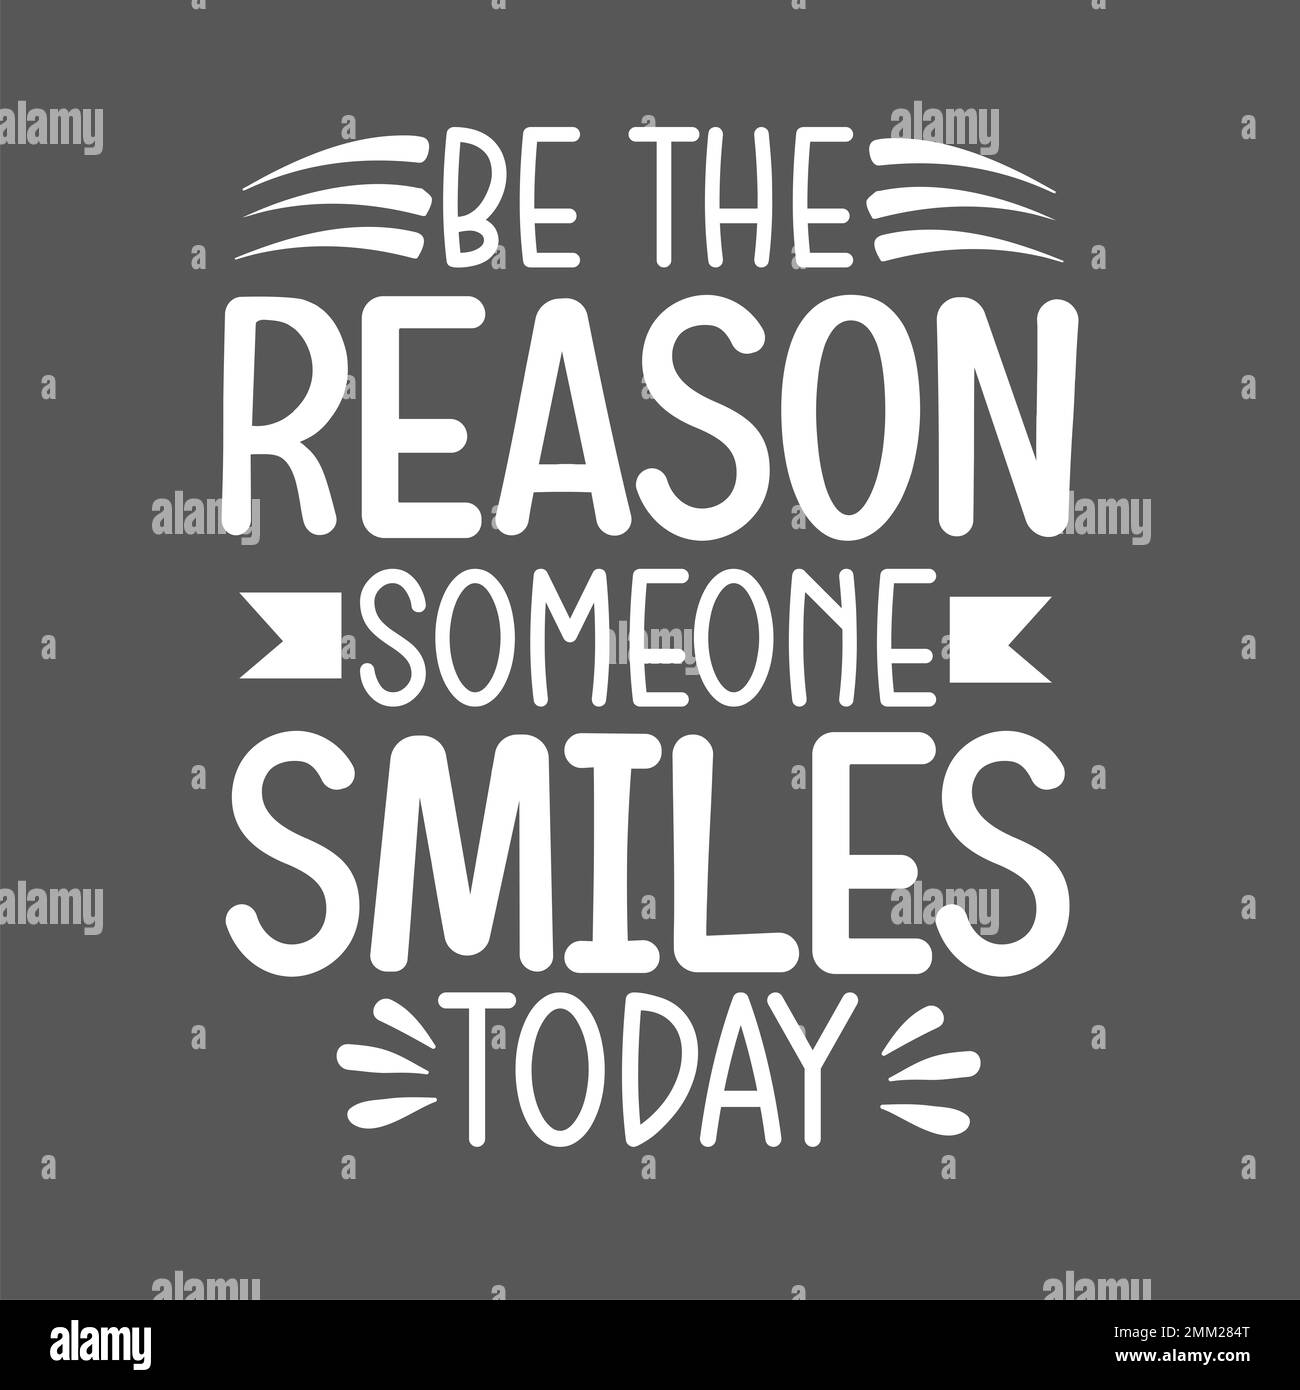 Be the reason someone smiles today motivational inspirational quotes Stock Photo